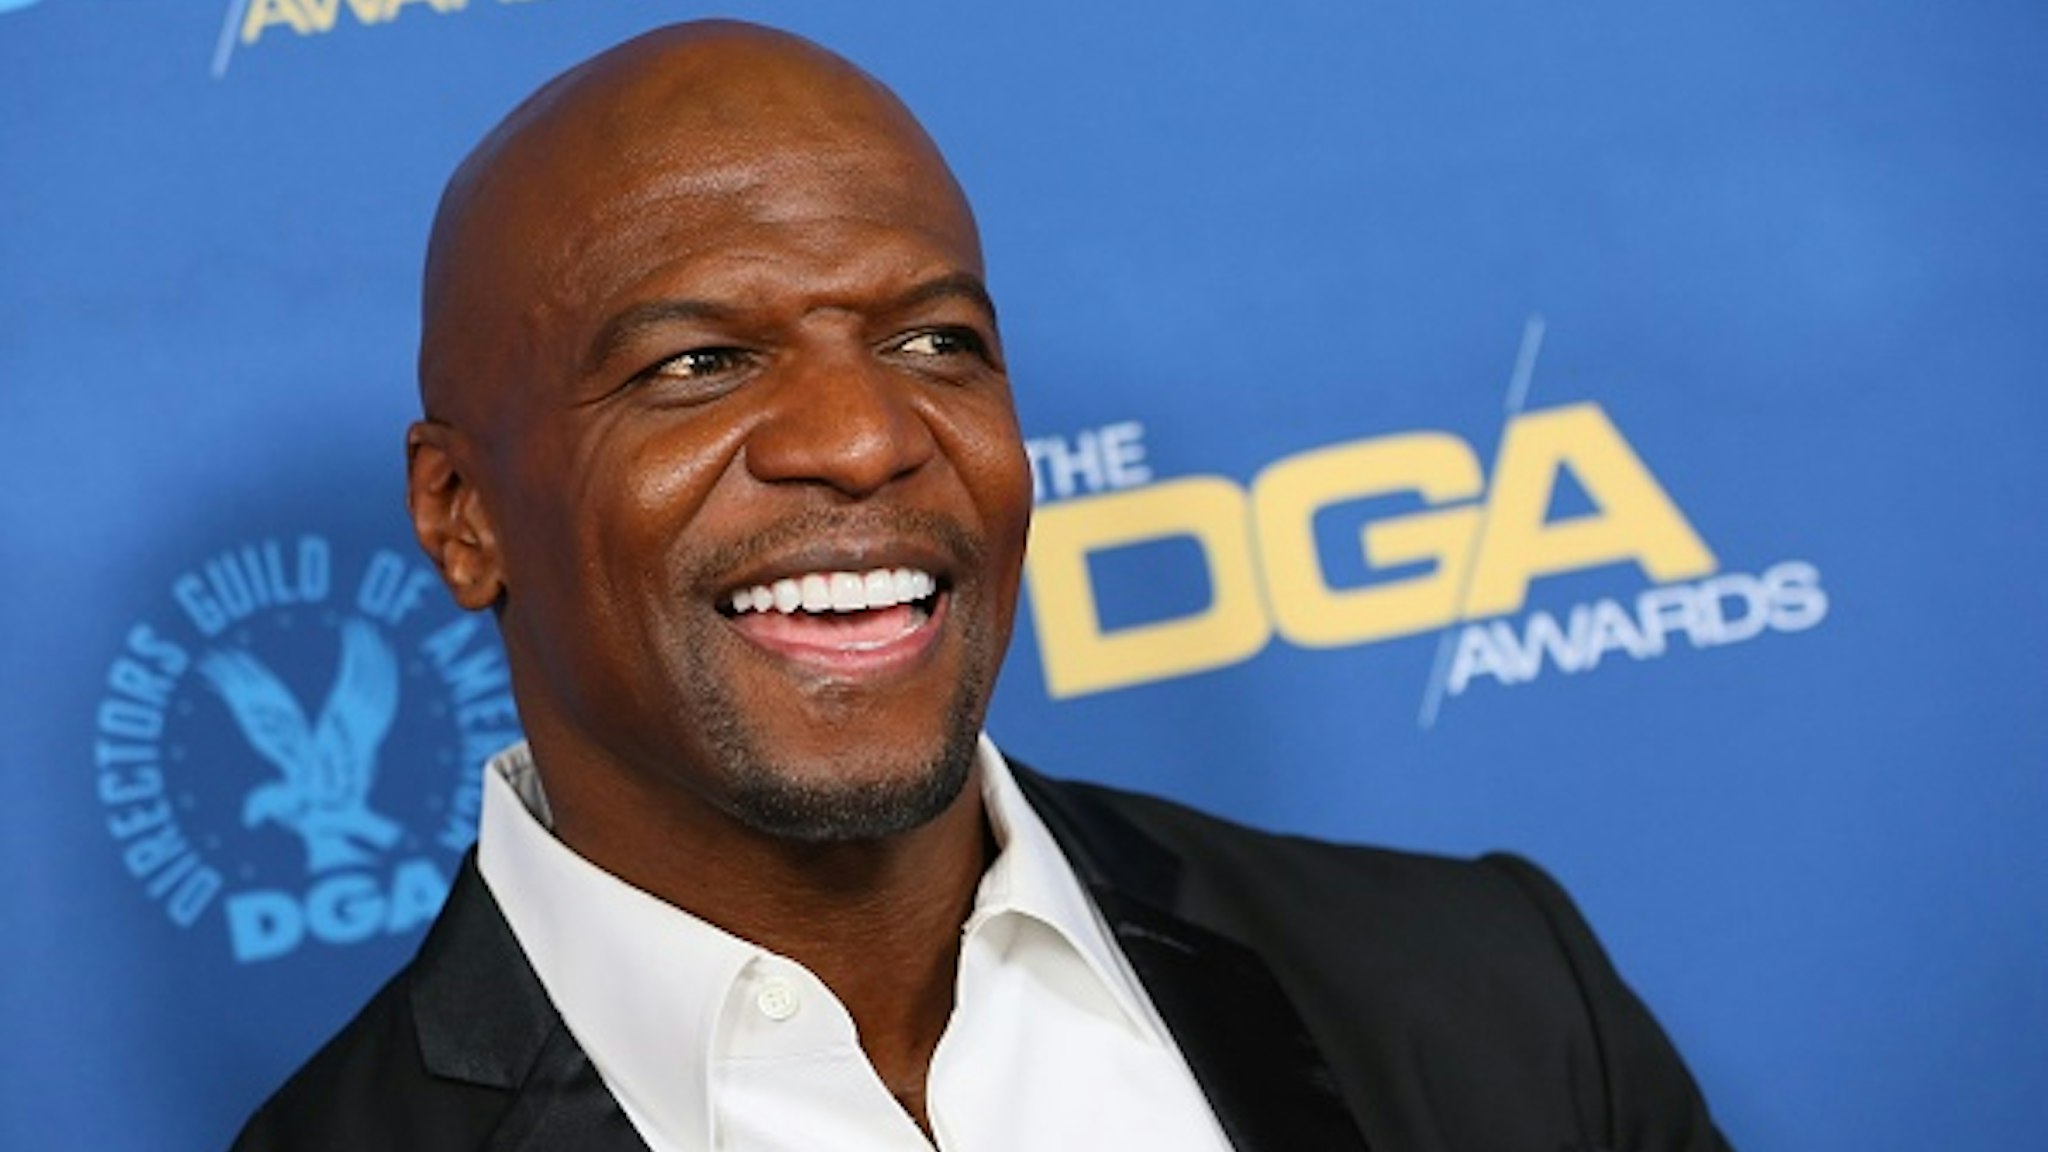 US actor Terry Crews arrives for the 72nd Annual Directors Guild of America Awards at the Ritz Carlton Hotel in Los Angeles on January 25, 2020.